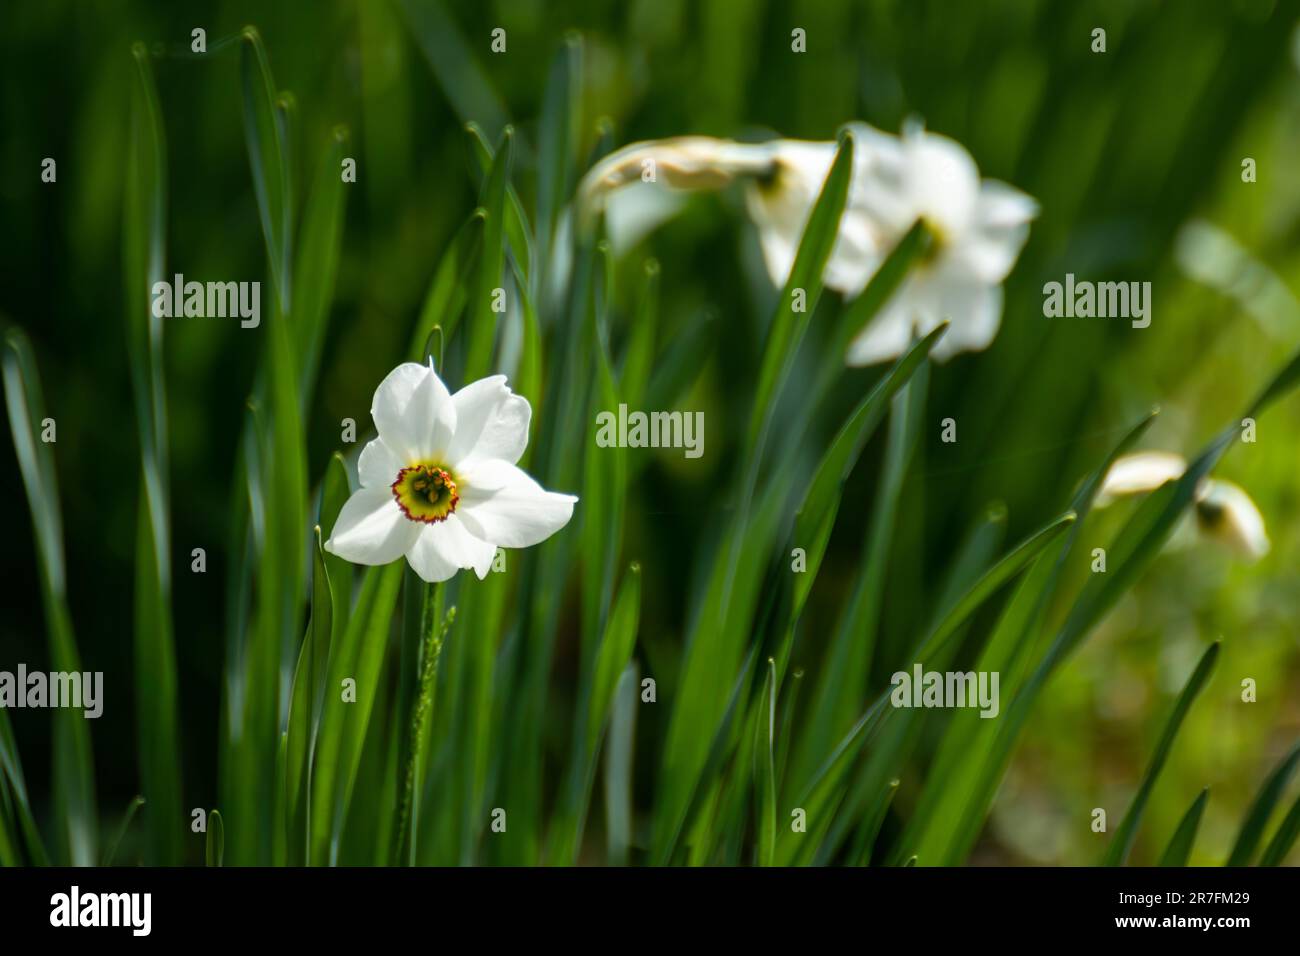 White Narcissus (amaryllis family, Amaryllidaceae) in vivid garden greenery, spring bloom with blurred background. Botany foliage with selective focus Stock Photo